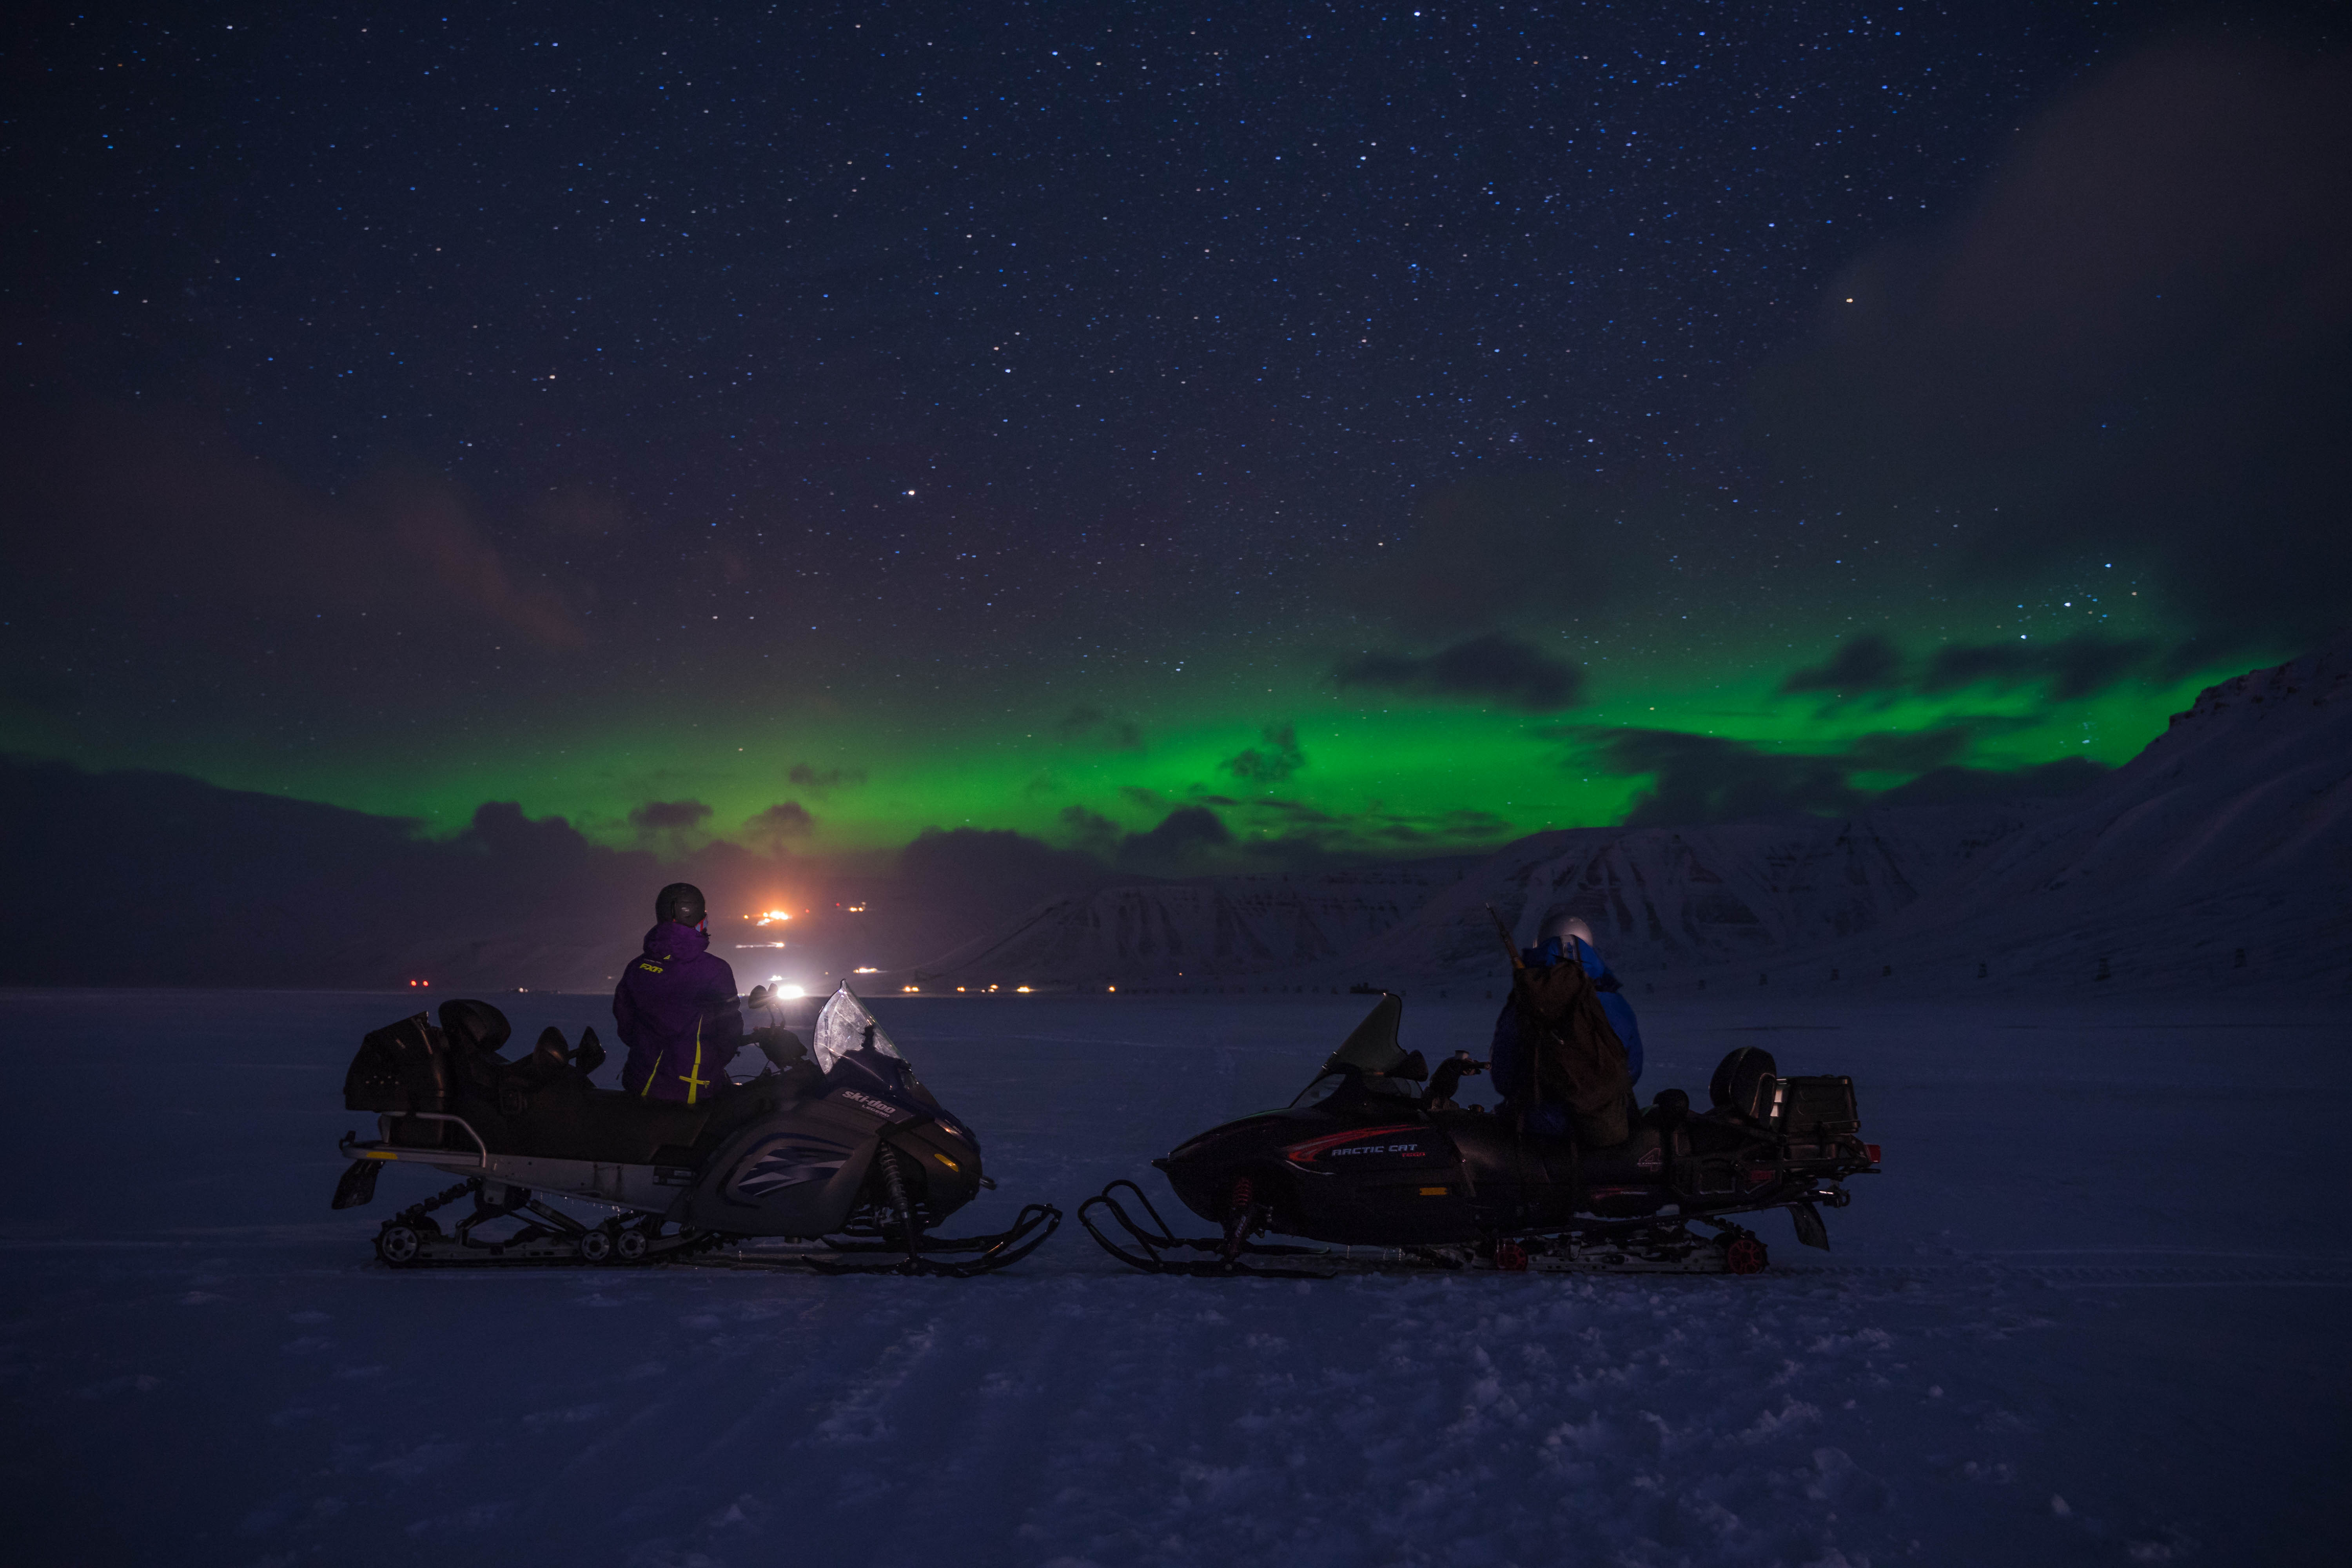 To persons on snowmobiles looking out across a landscape with northern lights in the skies in the background